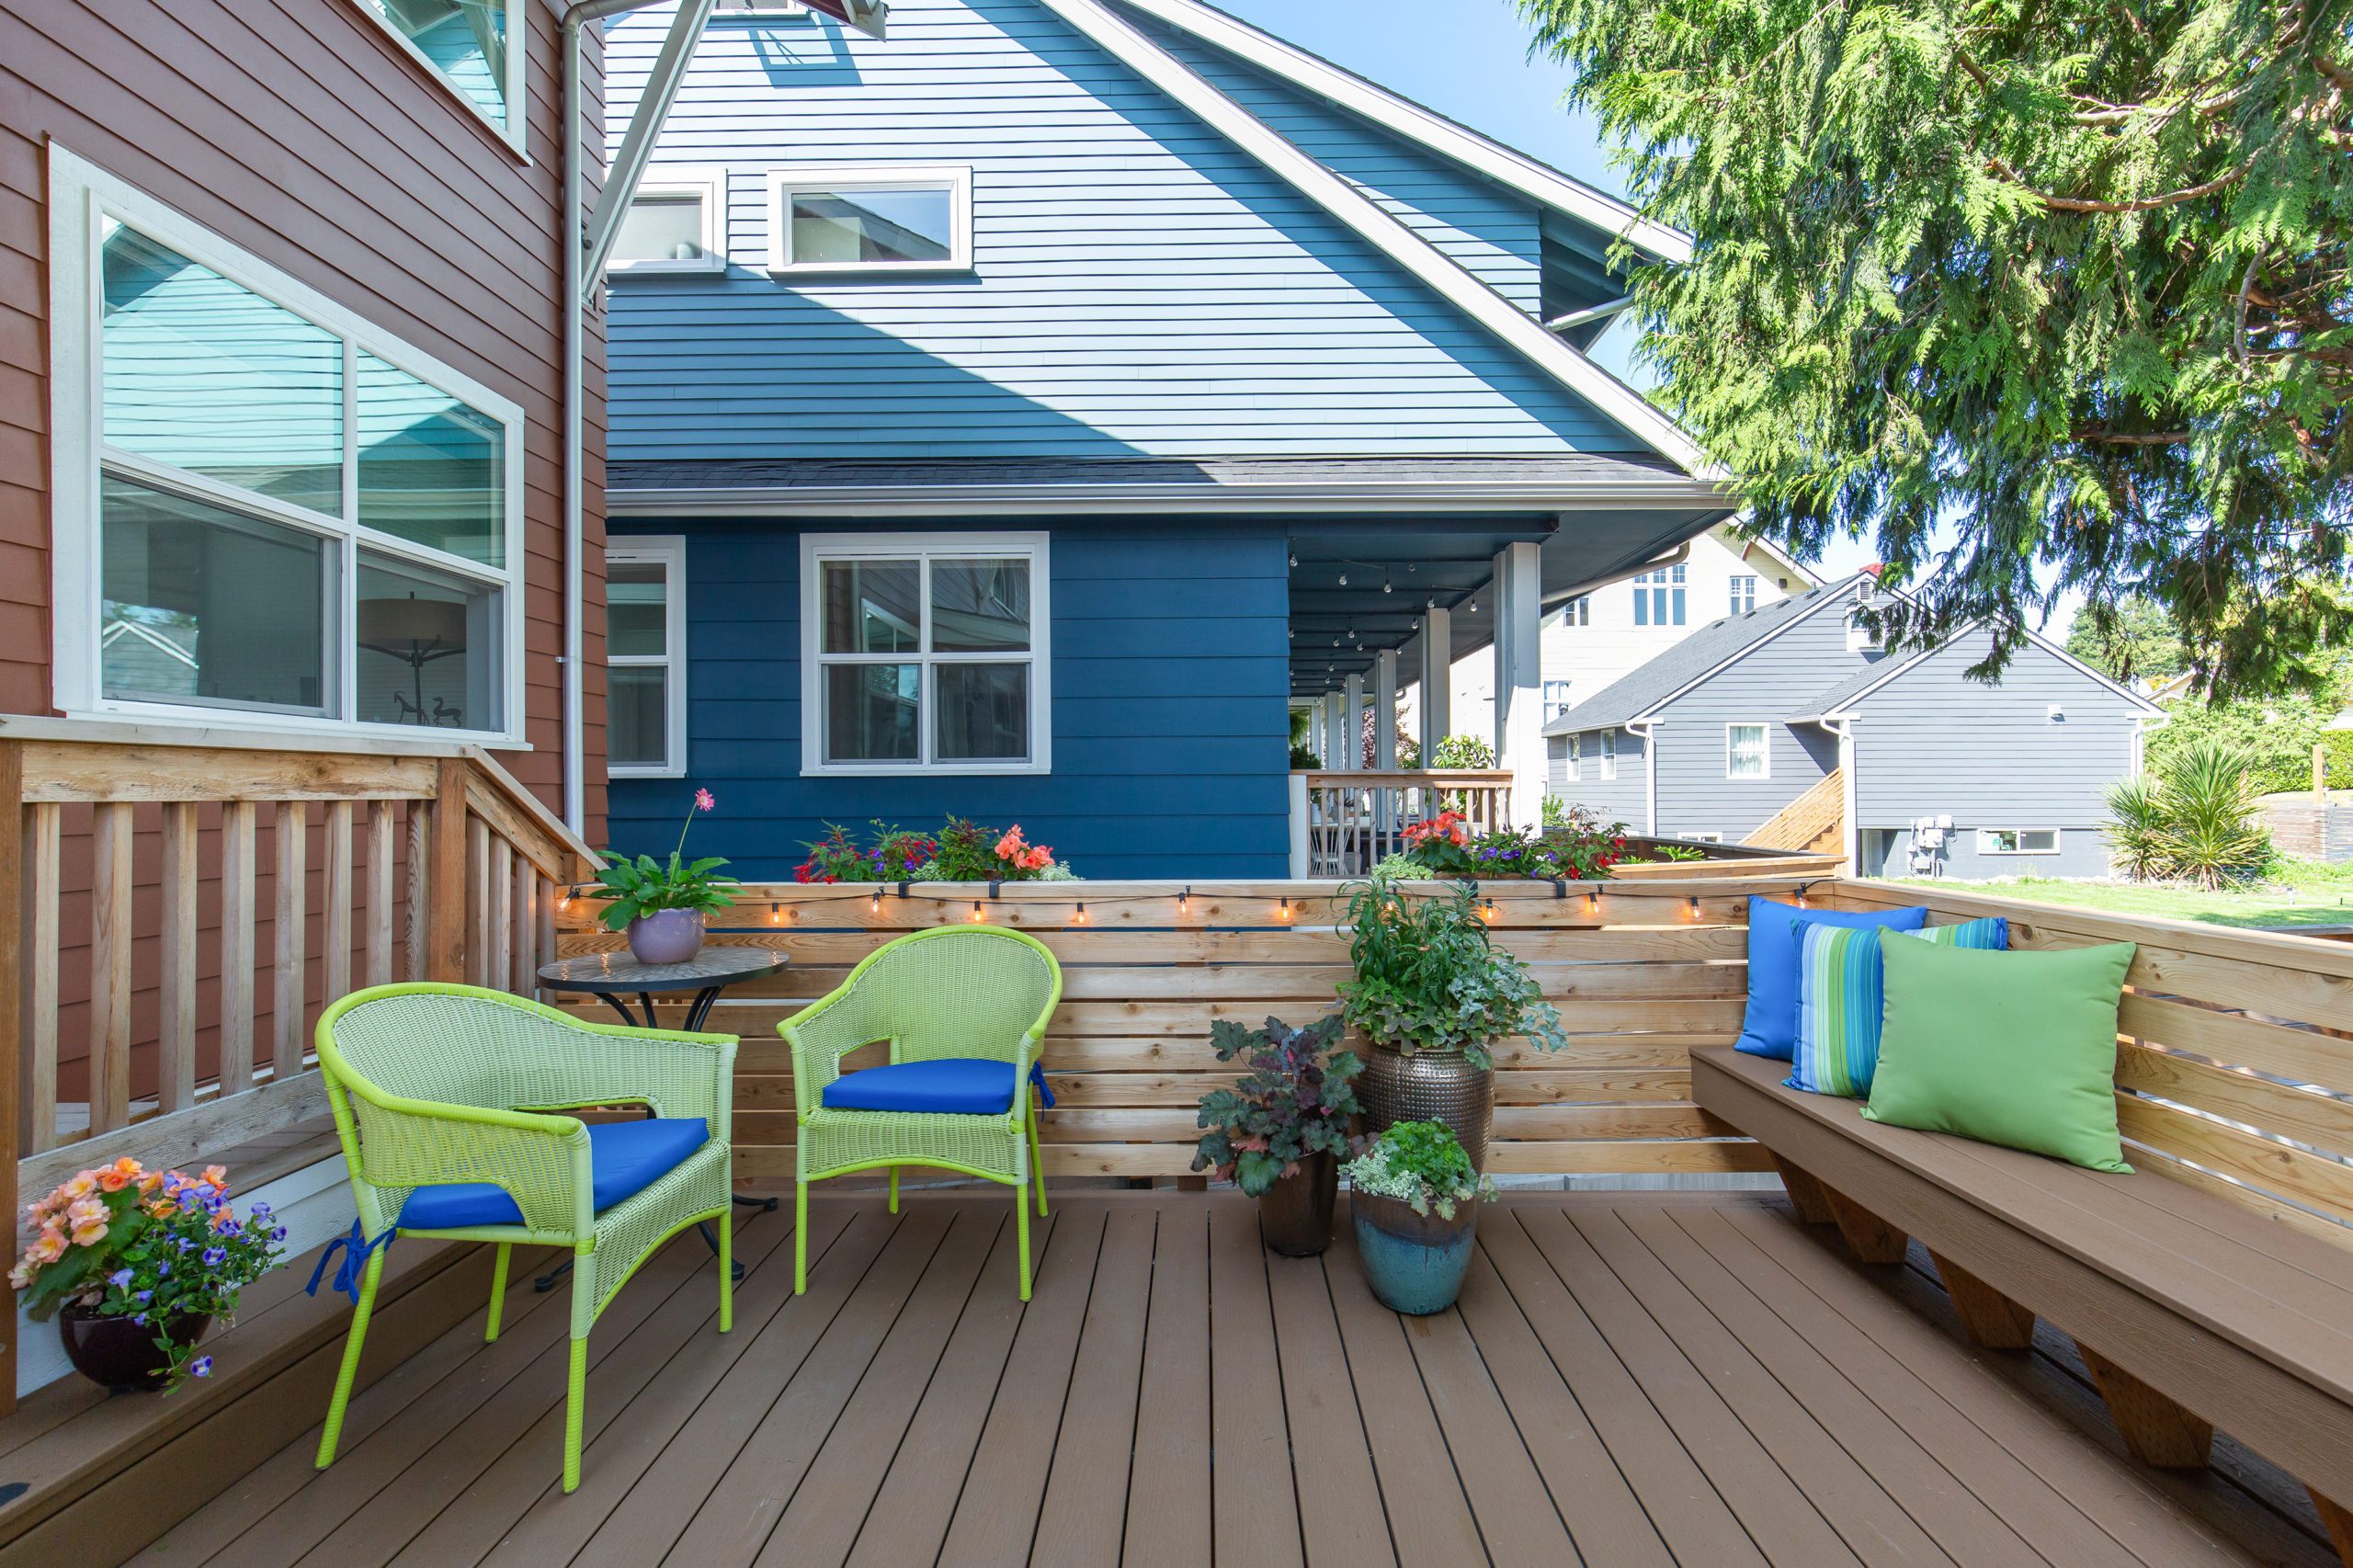 Backyard deck with bench seating and chairs